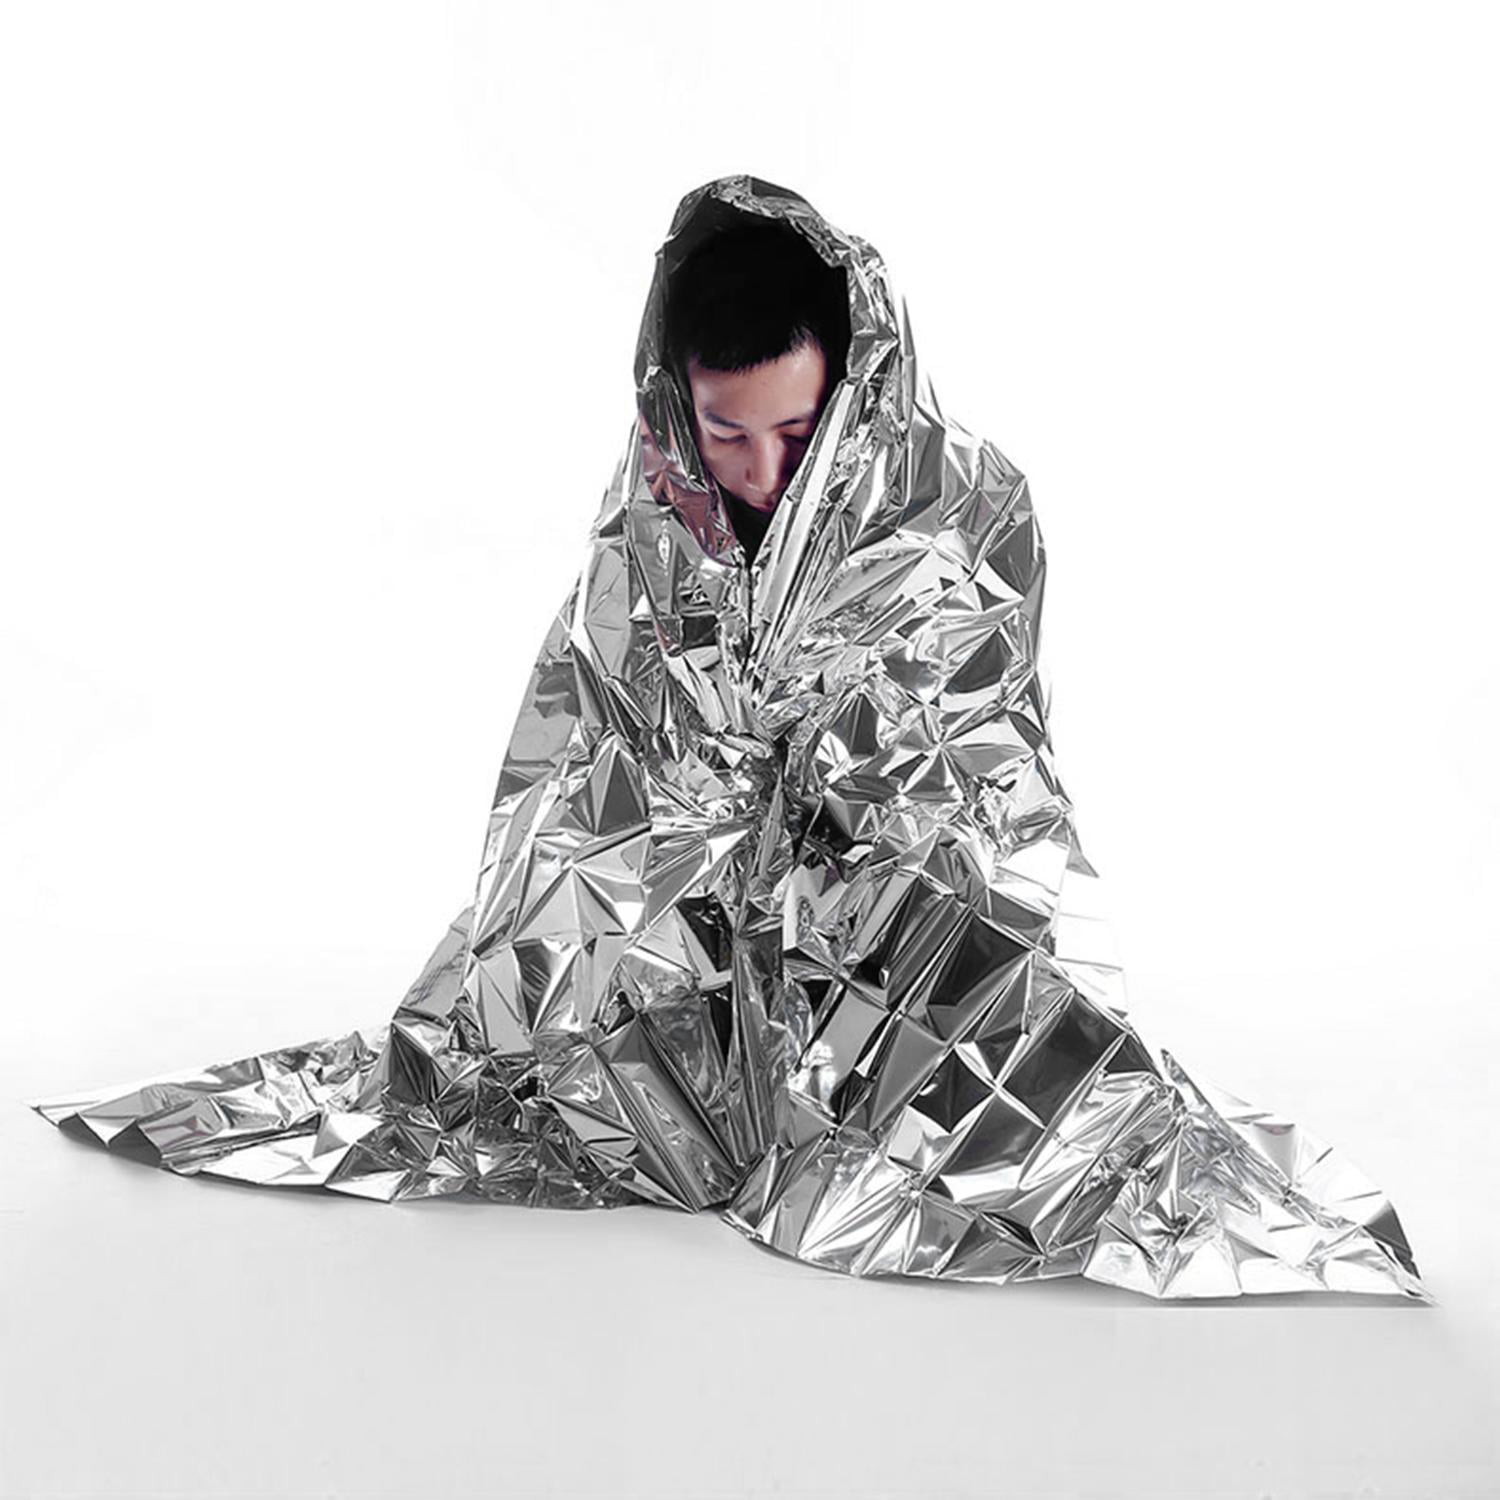 Individually wrapped Pack of 25 Thermal Emergency Blanket Foil Blanket 130 x210cm